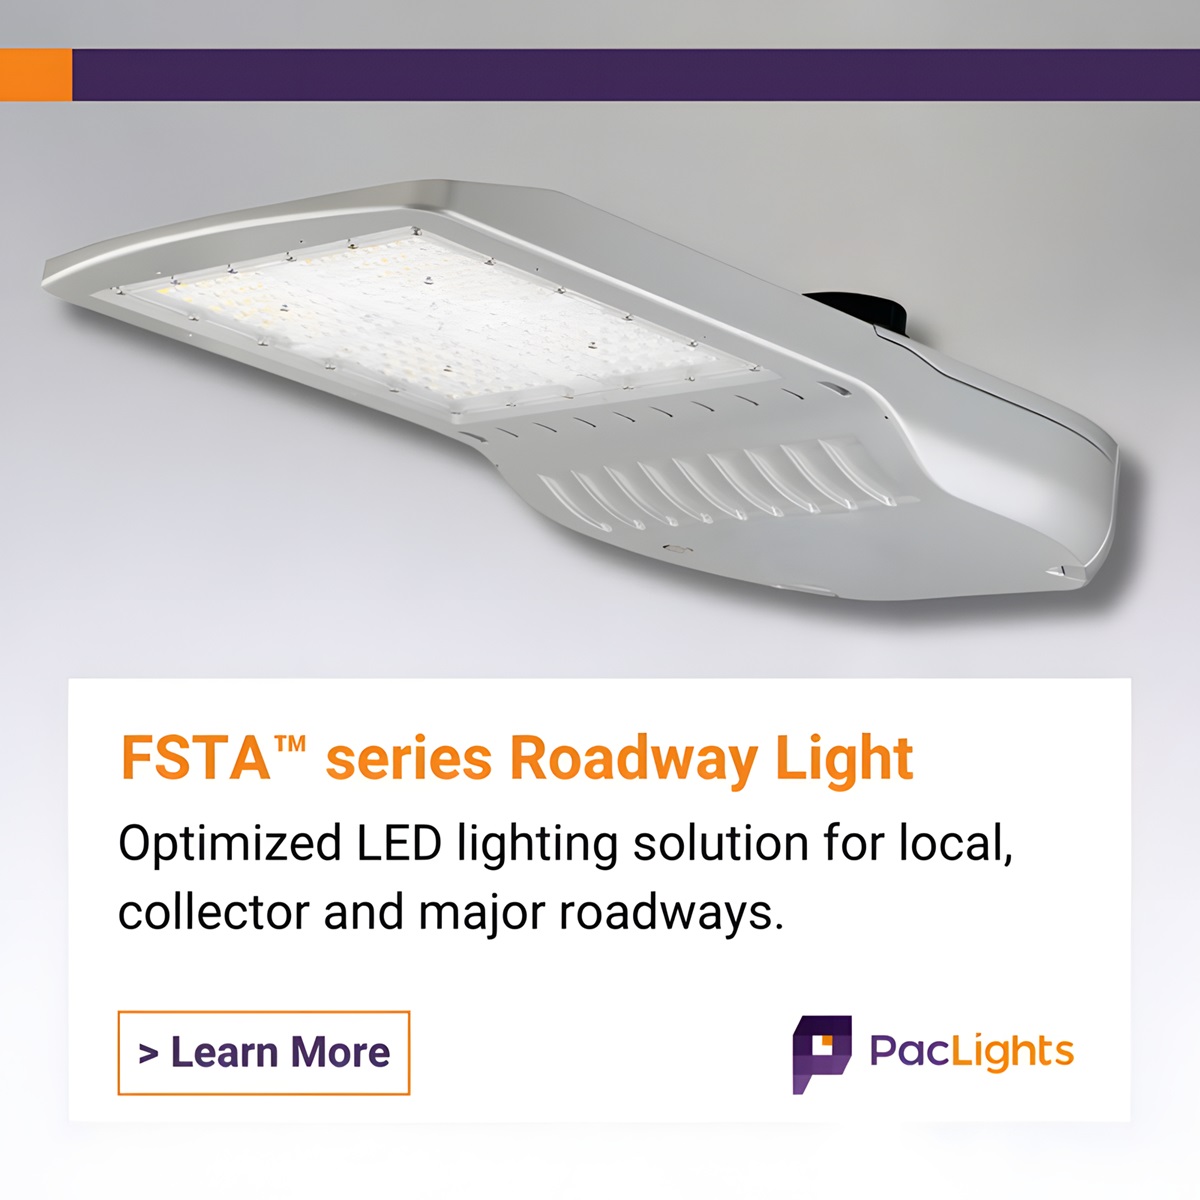 PacLights Launches the FSTA Series LED Roadway Lights